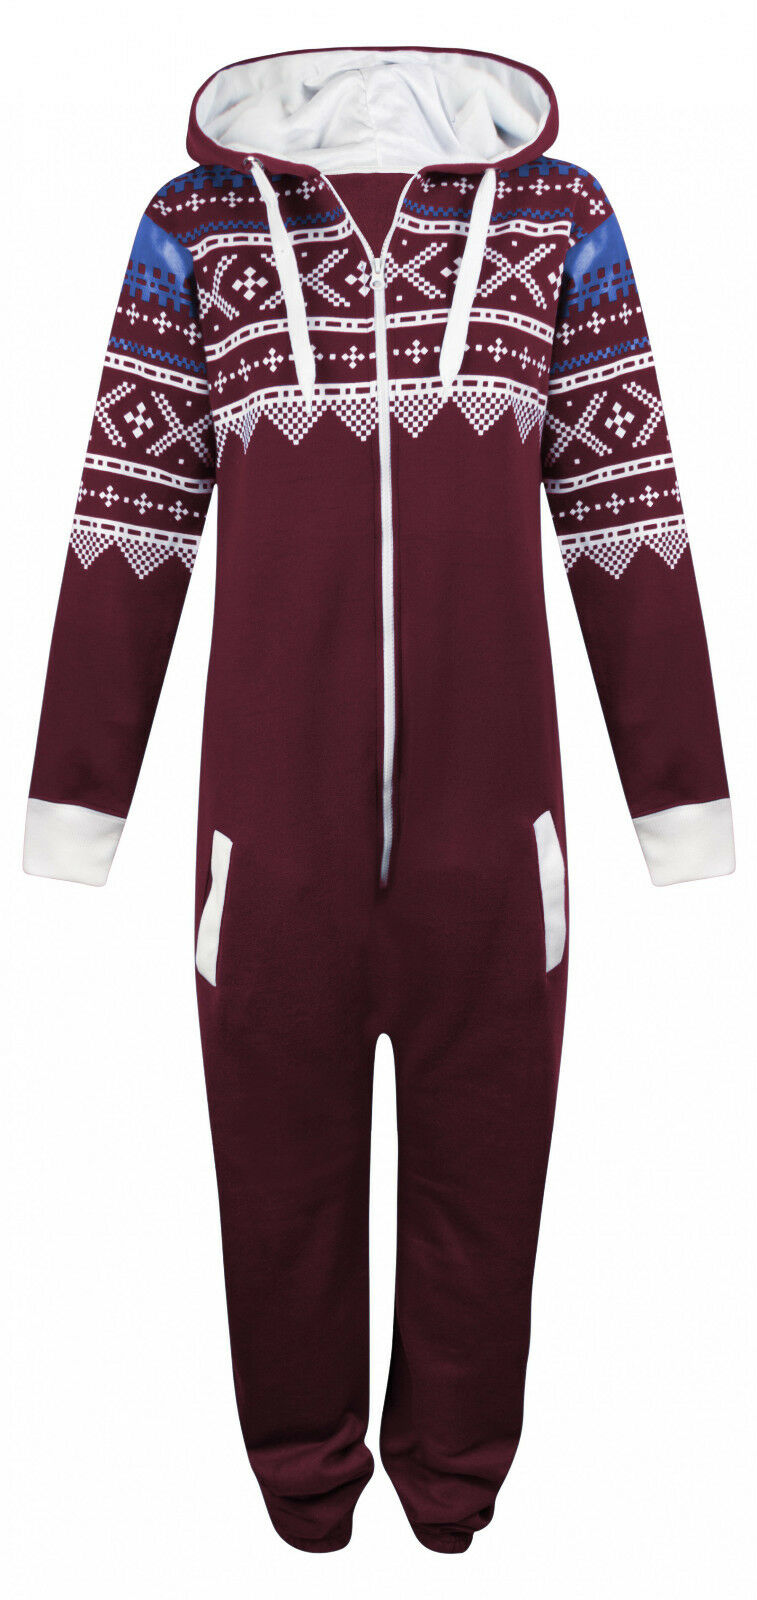 Wine Aztec Onesie With Blue Design. These Have A White Cotton Lined Hood With The Rest Of The Onesie Being Fleece.They Have Elasticated Ribbed Cuffs And Front Pockets.The Zip At The Front Goes From The Neck To Just Below The Waist. These Are A Lose Fit Onesie. Sizes 2XL To 4XL Available.